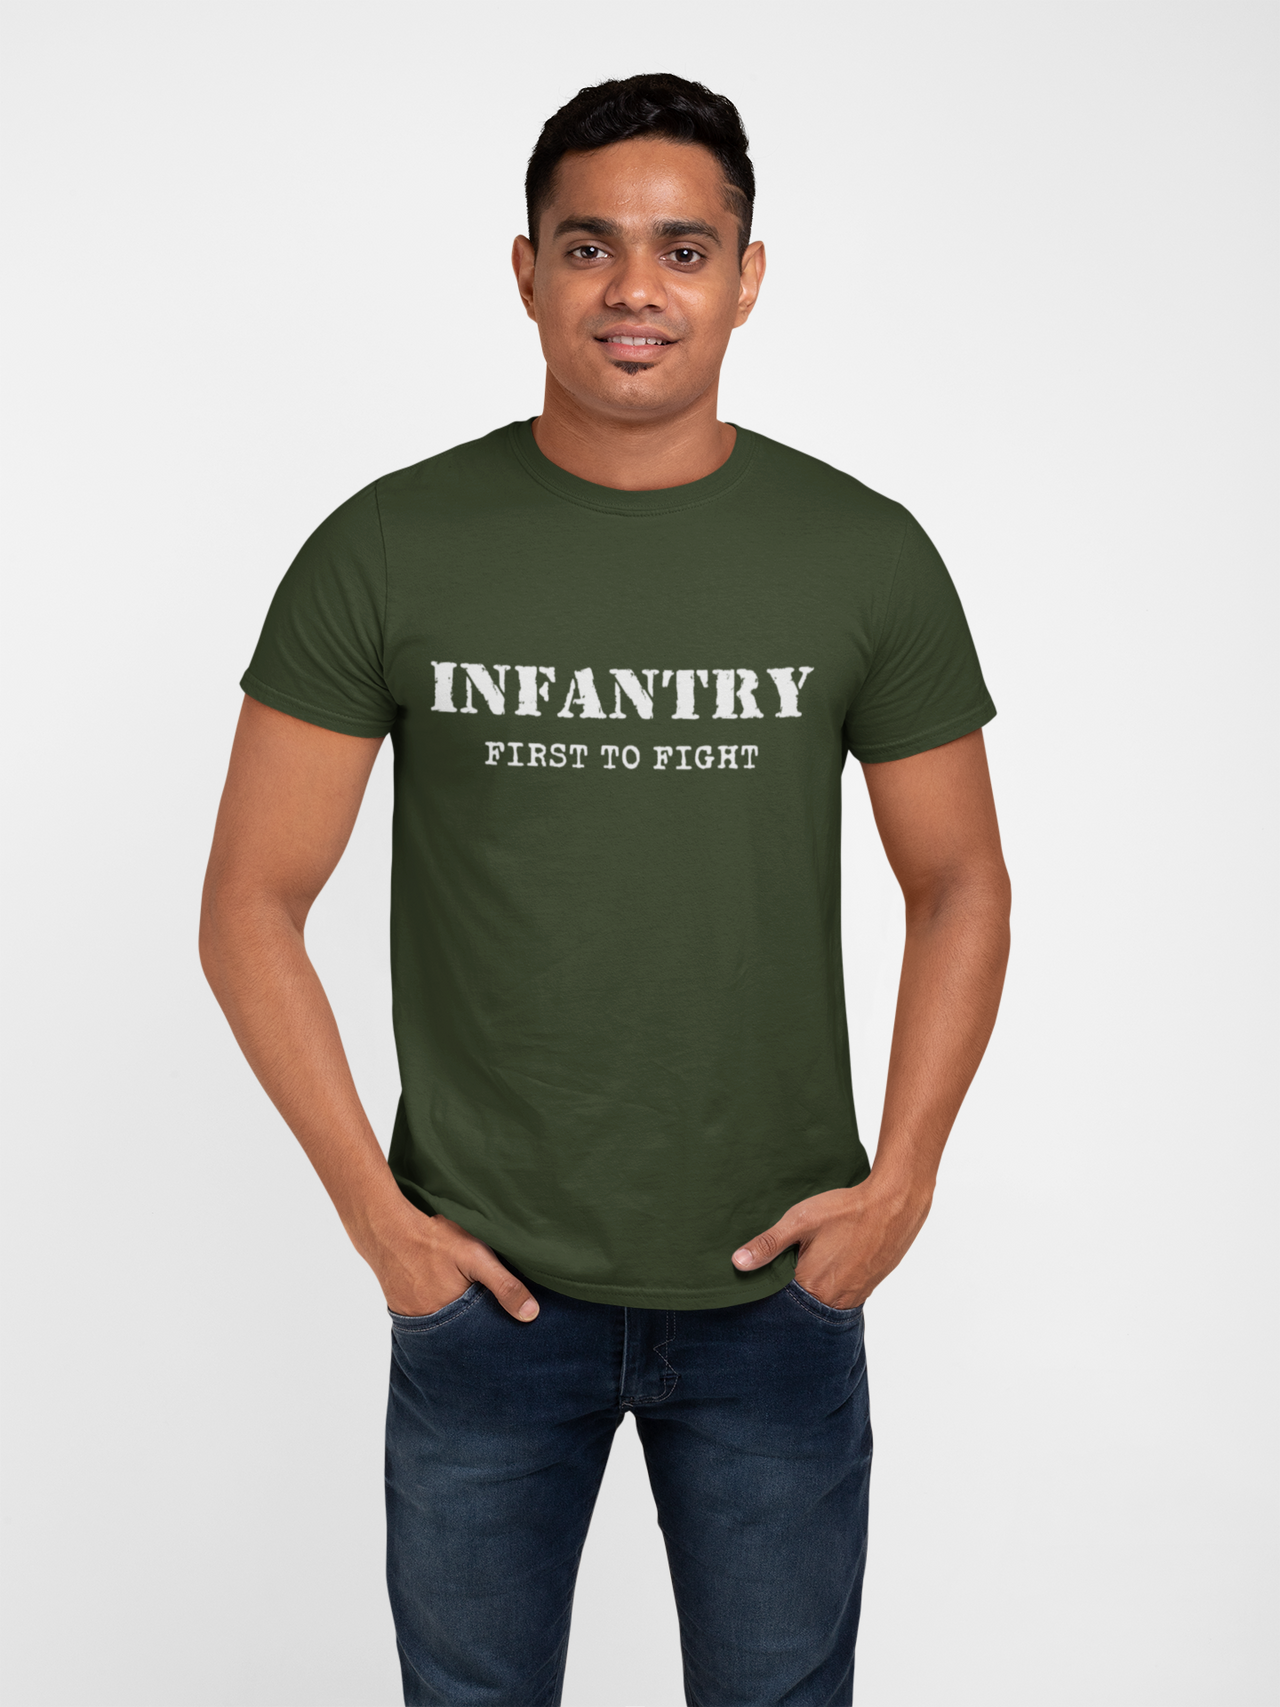 Infantry T-shirt - First to Fight (Men)